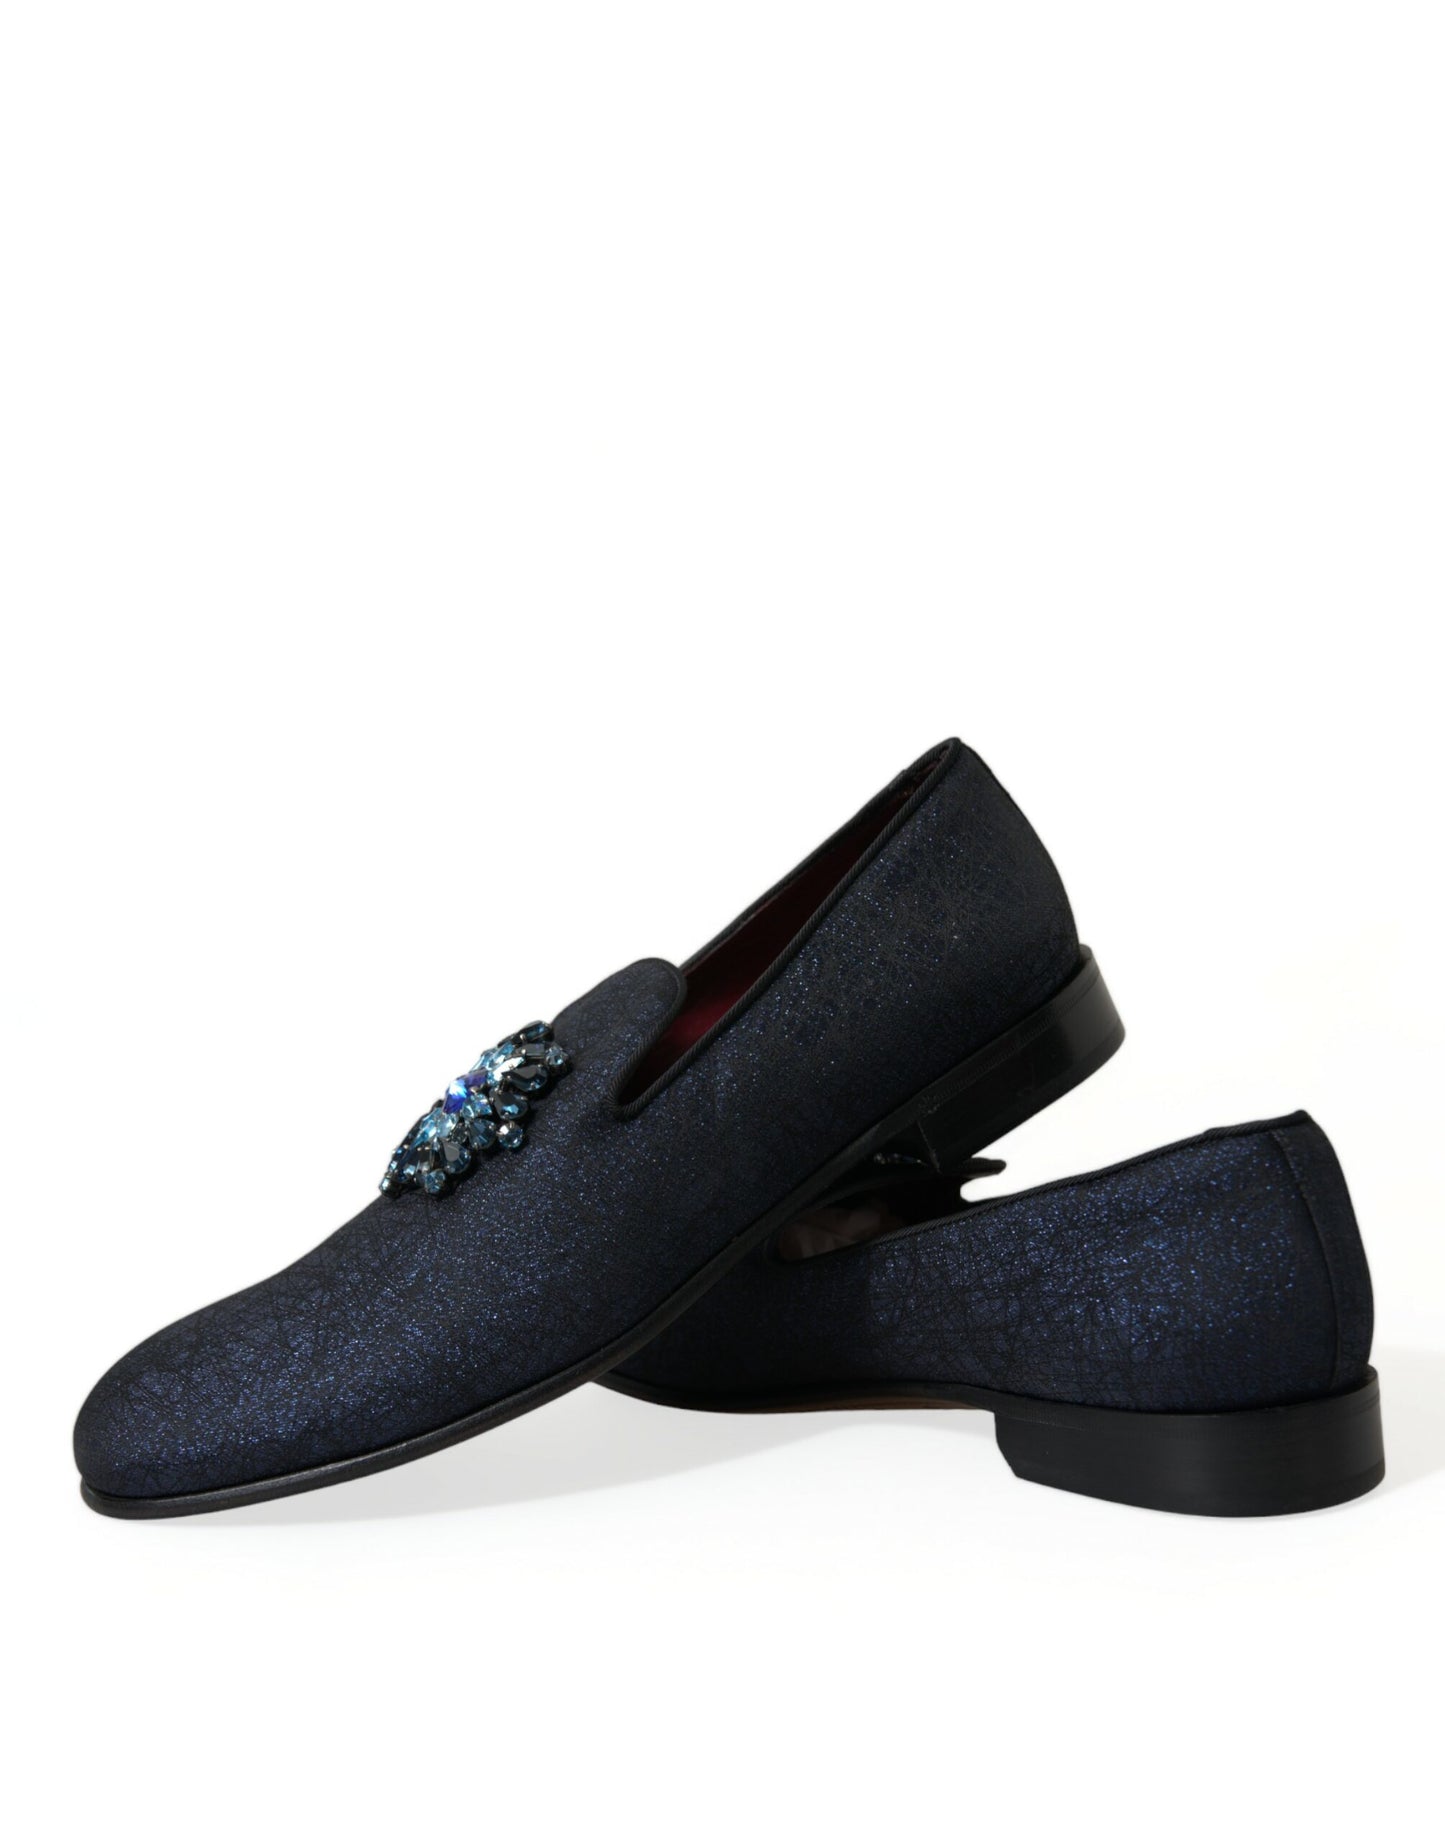 Dolce & Gabbana Elegant Blue Lurex Loafers with Crystal Accents